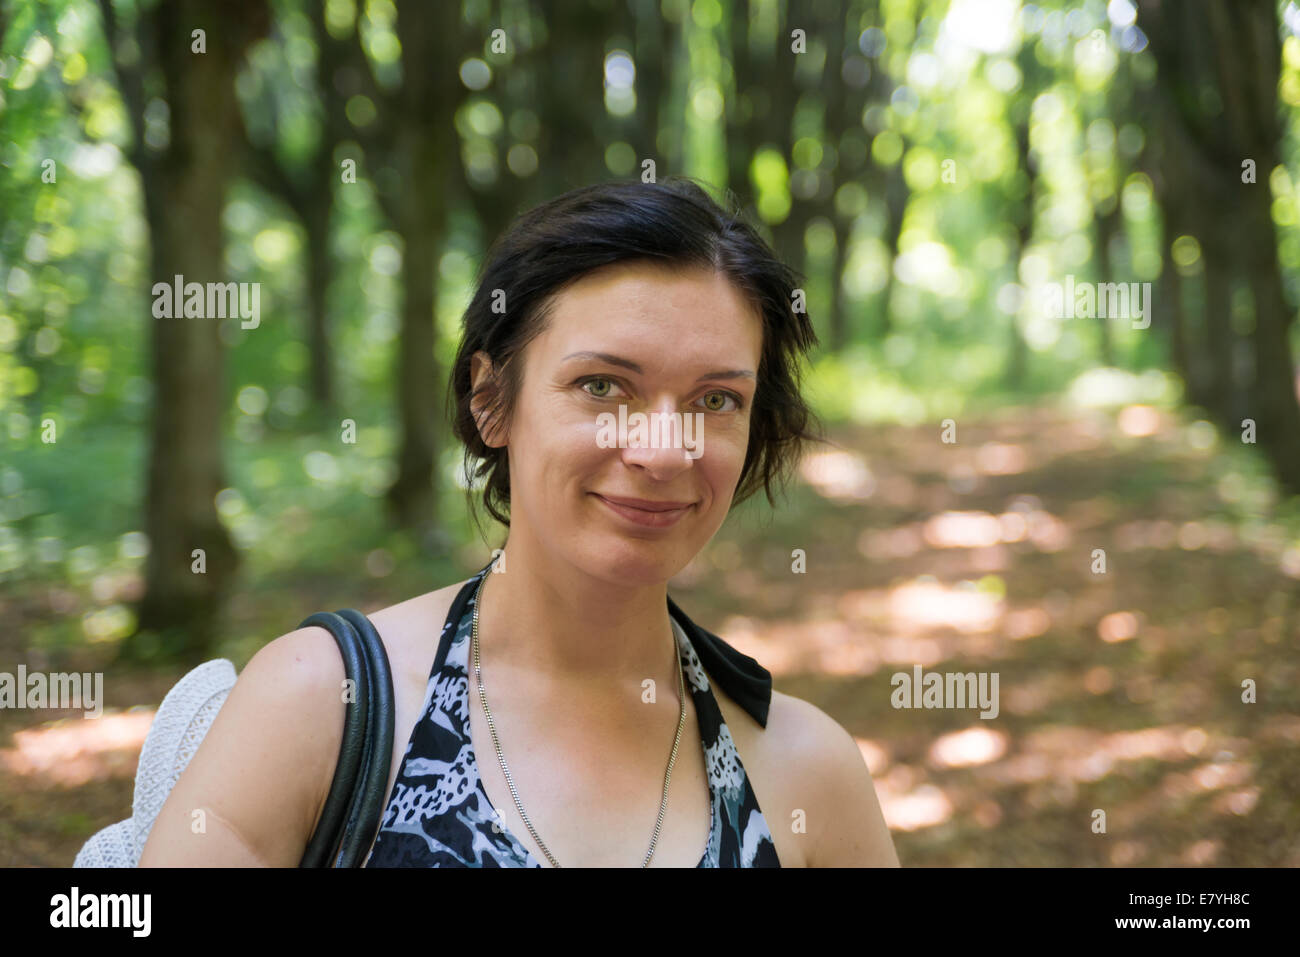 nice girl in a forest smiling Stock Photo